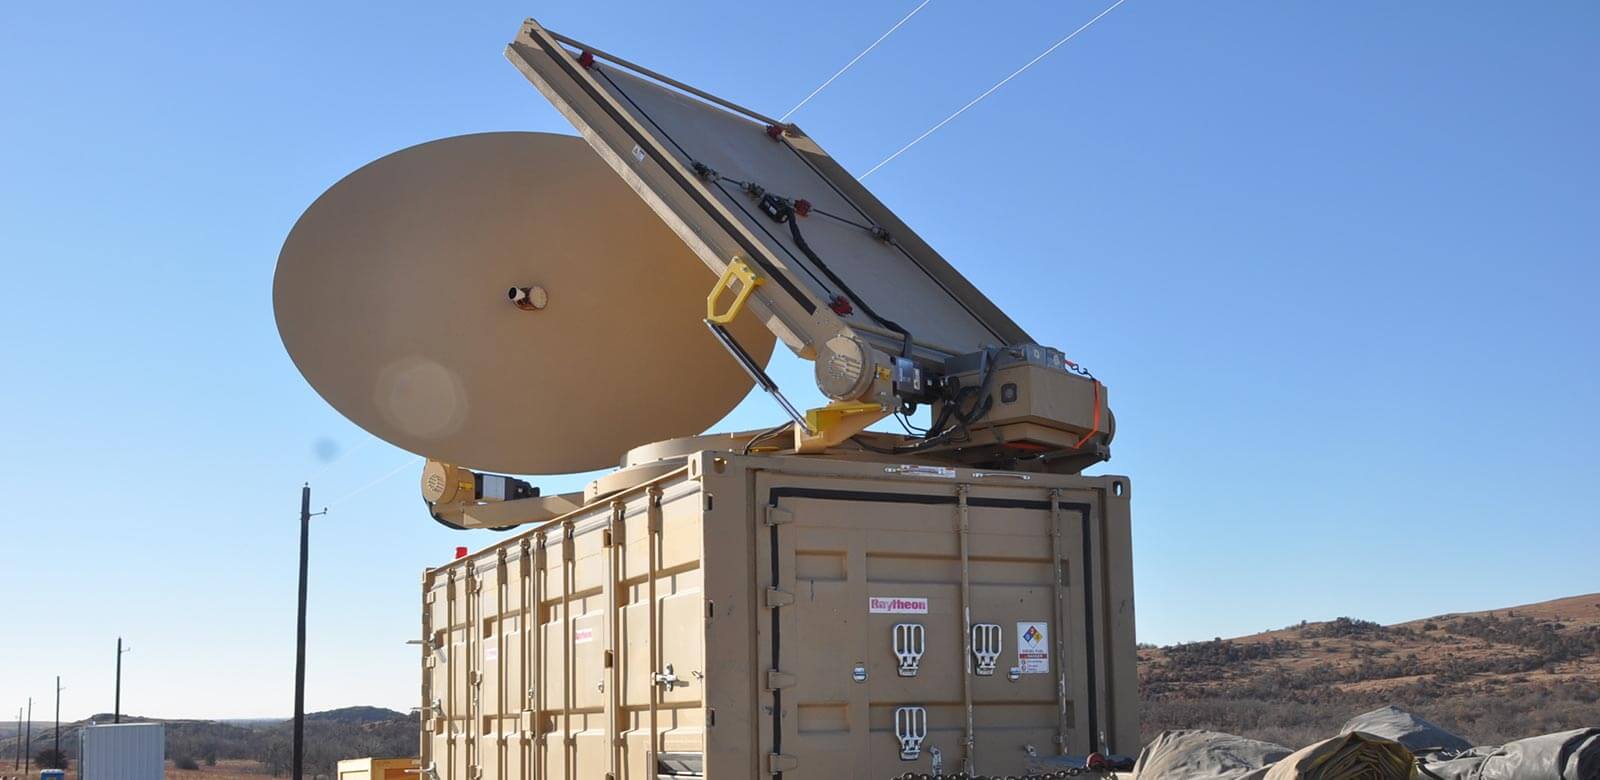 Radar on the top of a container being towed by a flatbed truck